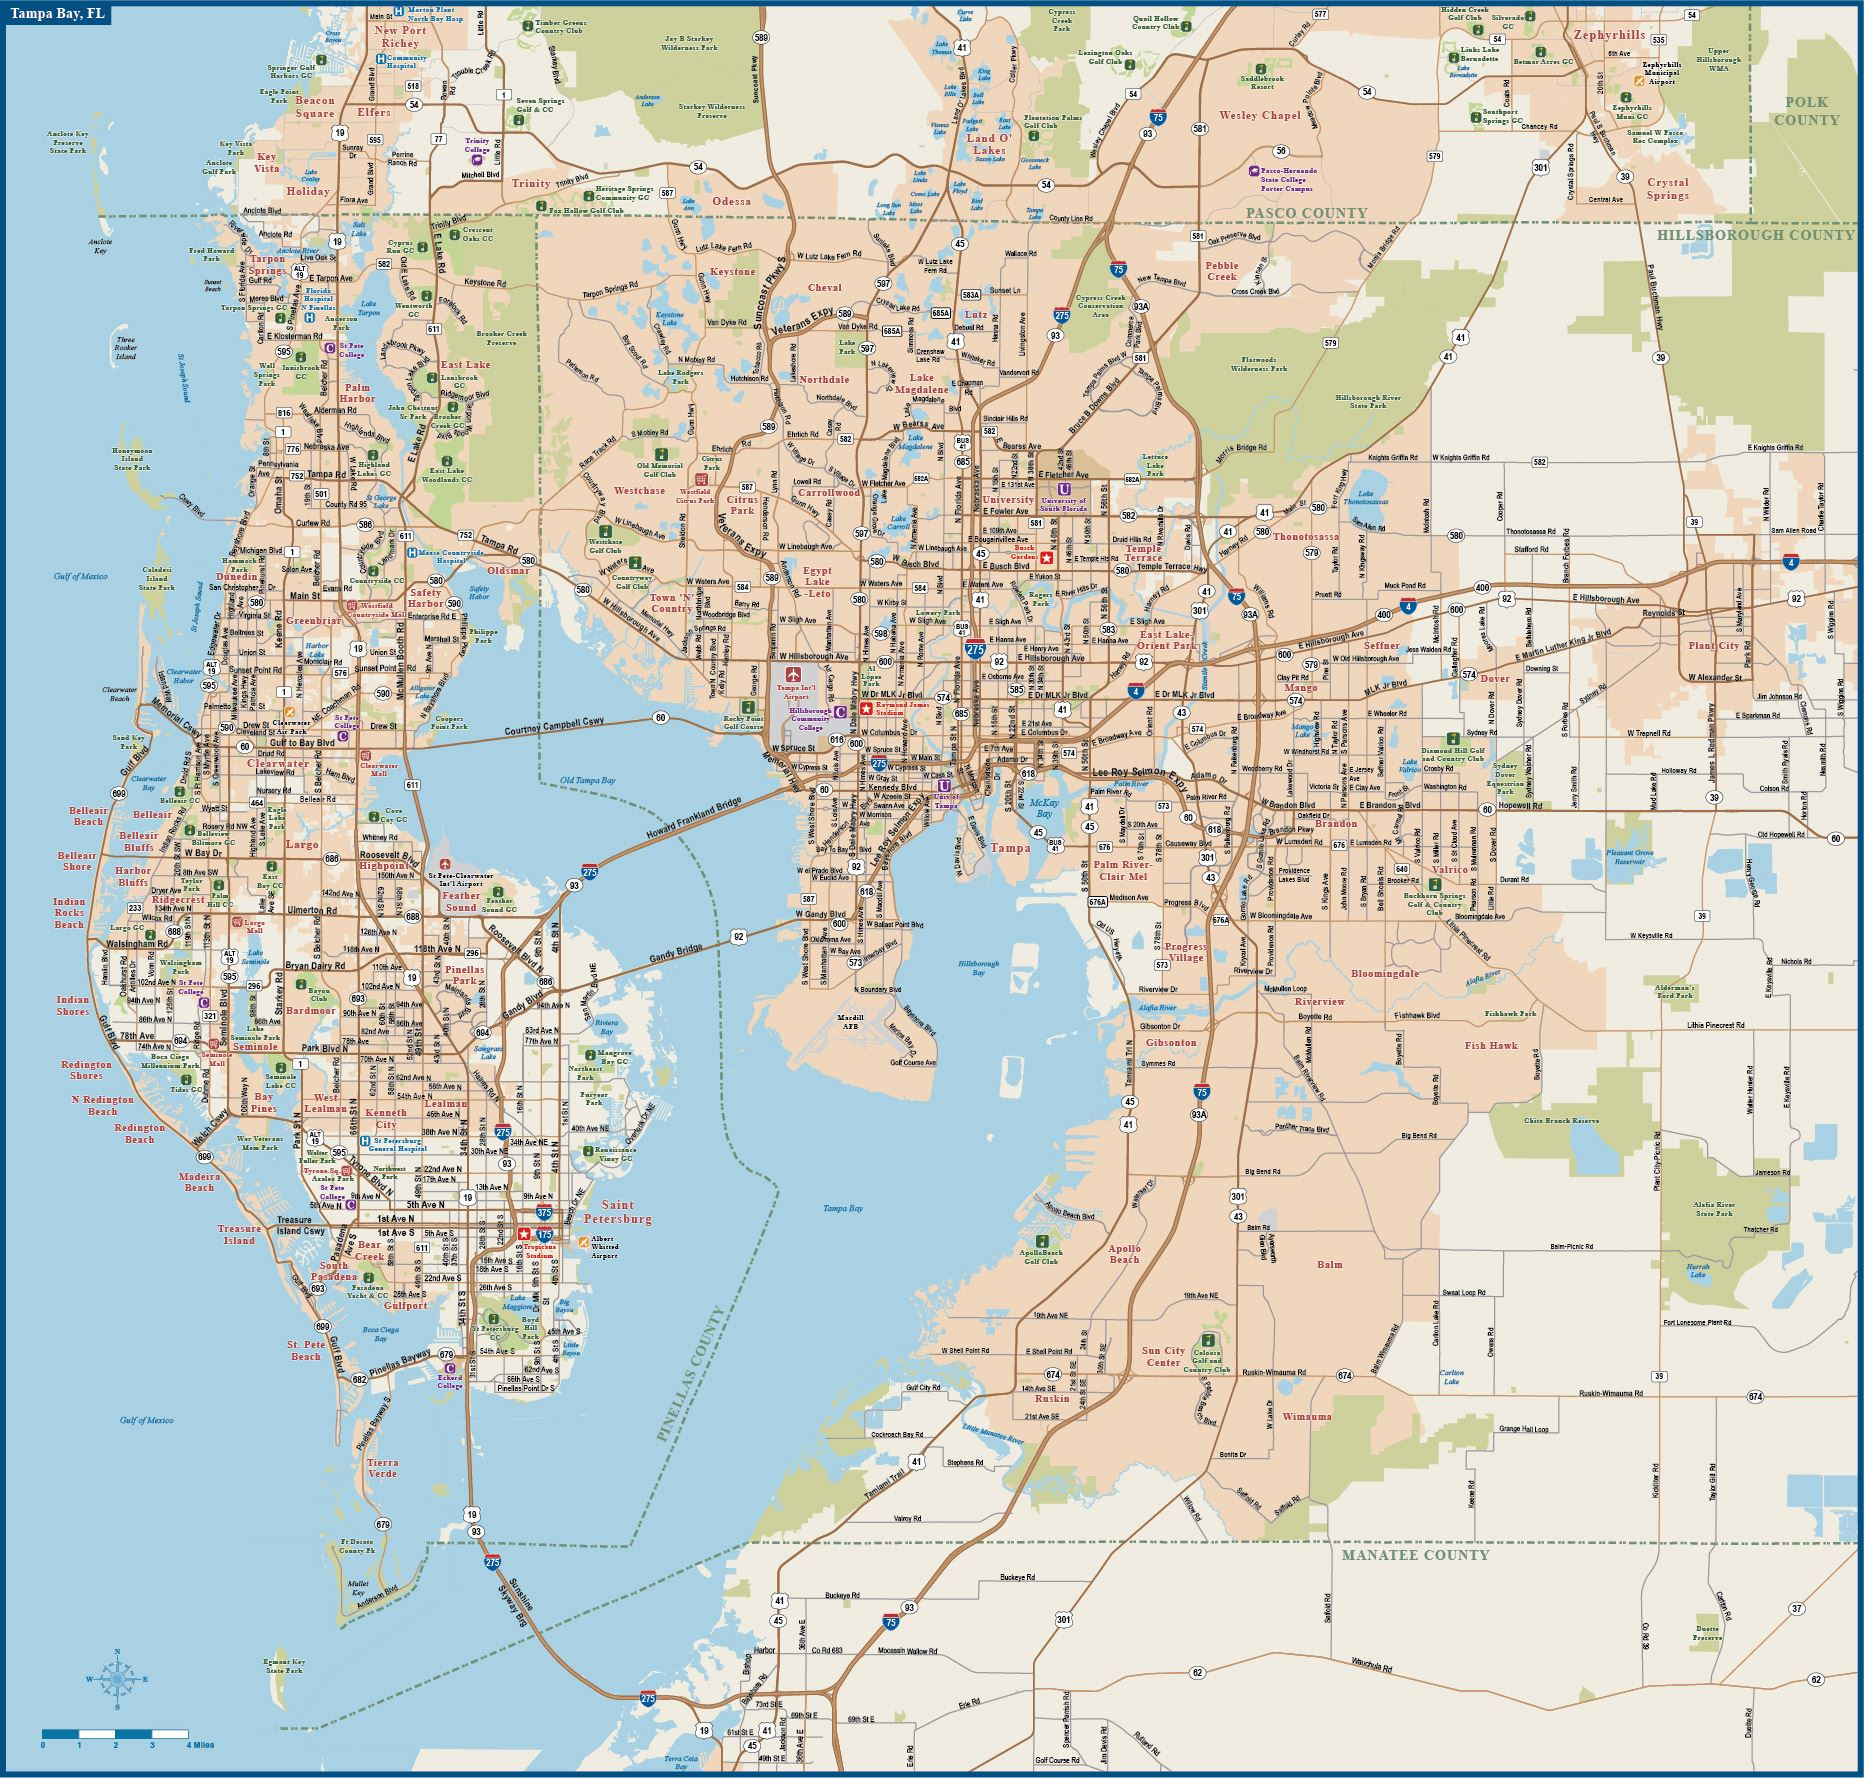 Large Tampa Maps For Free Download And Print | High-Resolution And - Map Of Florida Showing Tampa And Clearwater